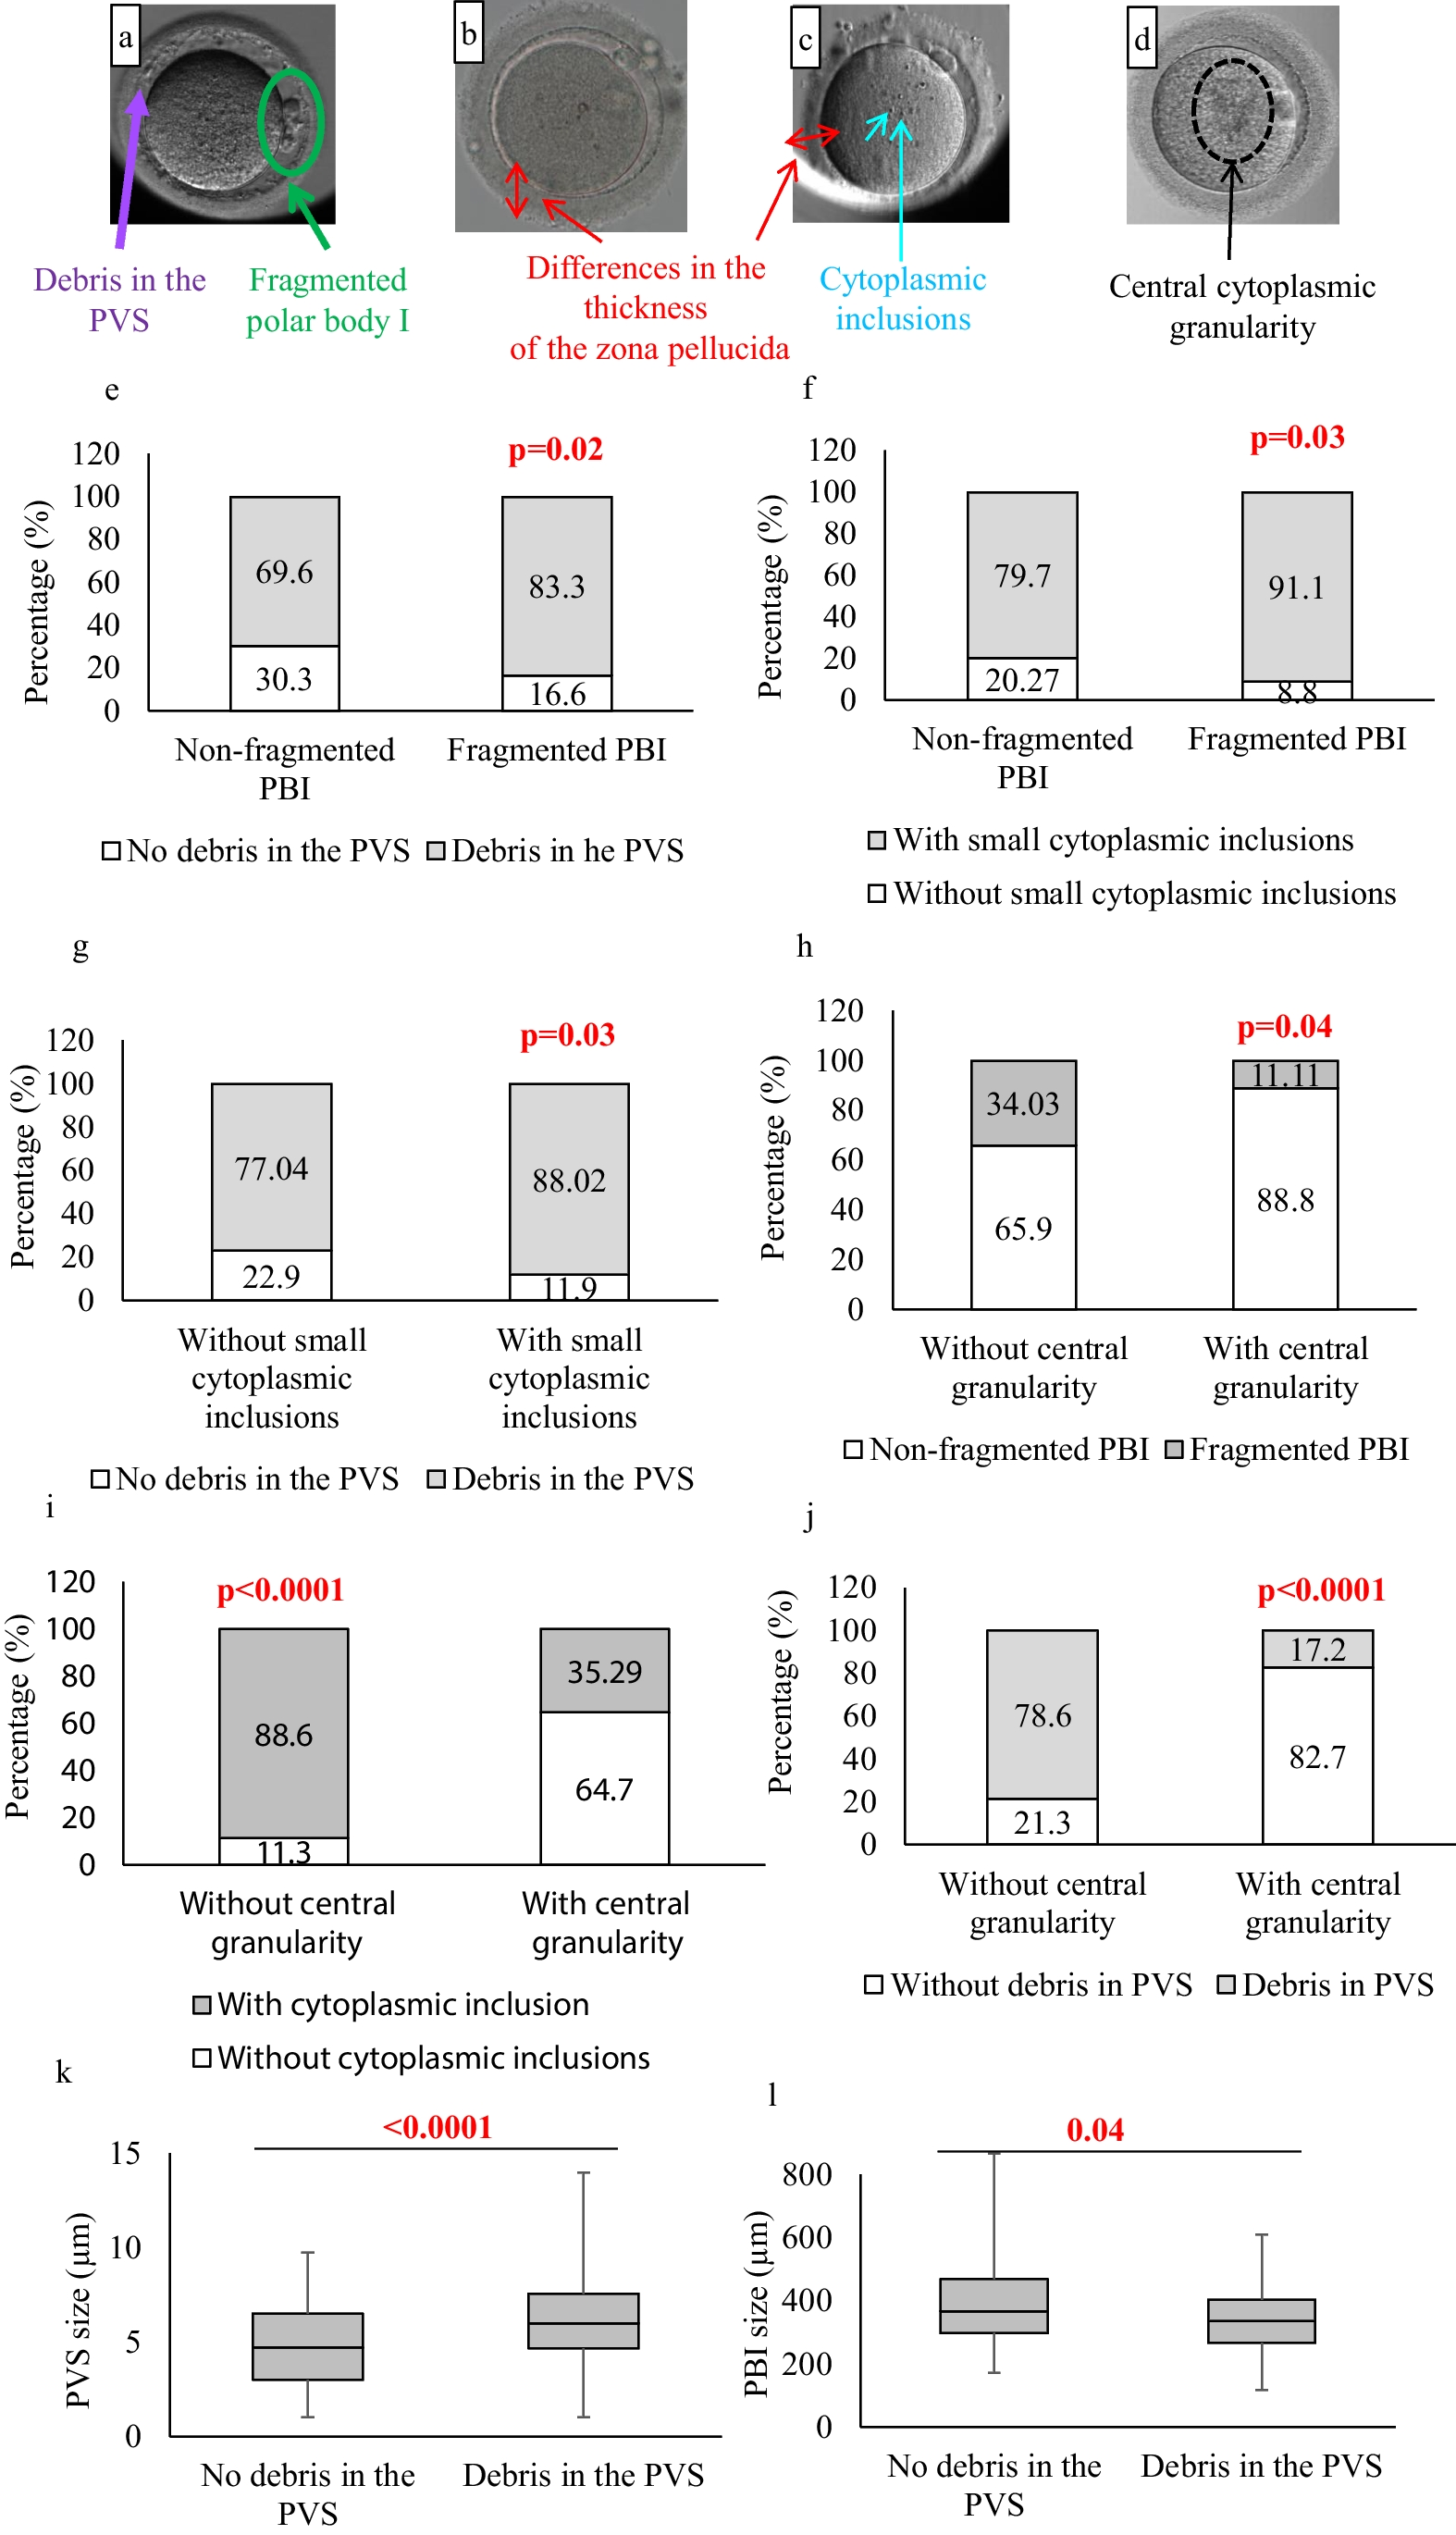 Mature oocyte dysmorphisms may be associated with progesterone levels, mitochondrial DNA content, and vitality in luteal granulosa cells